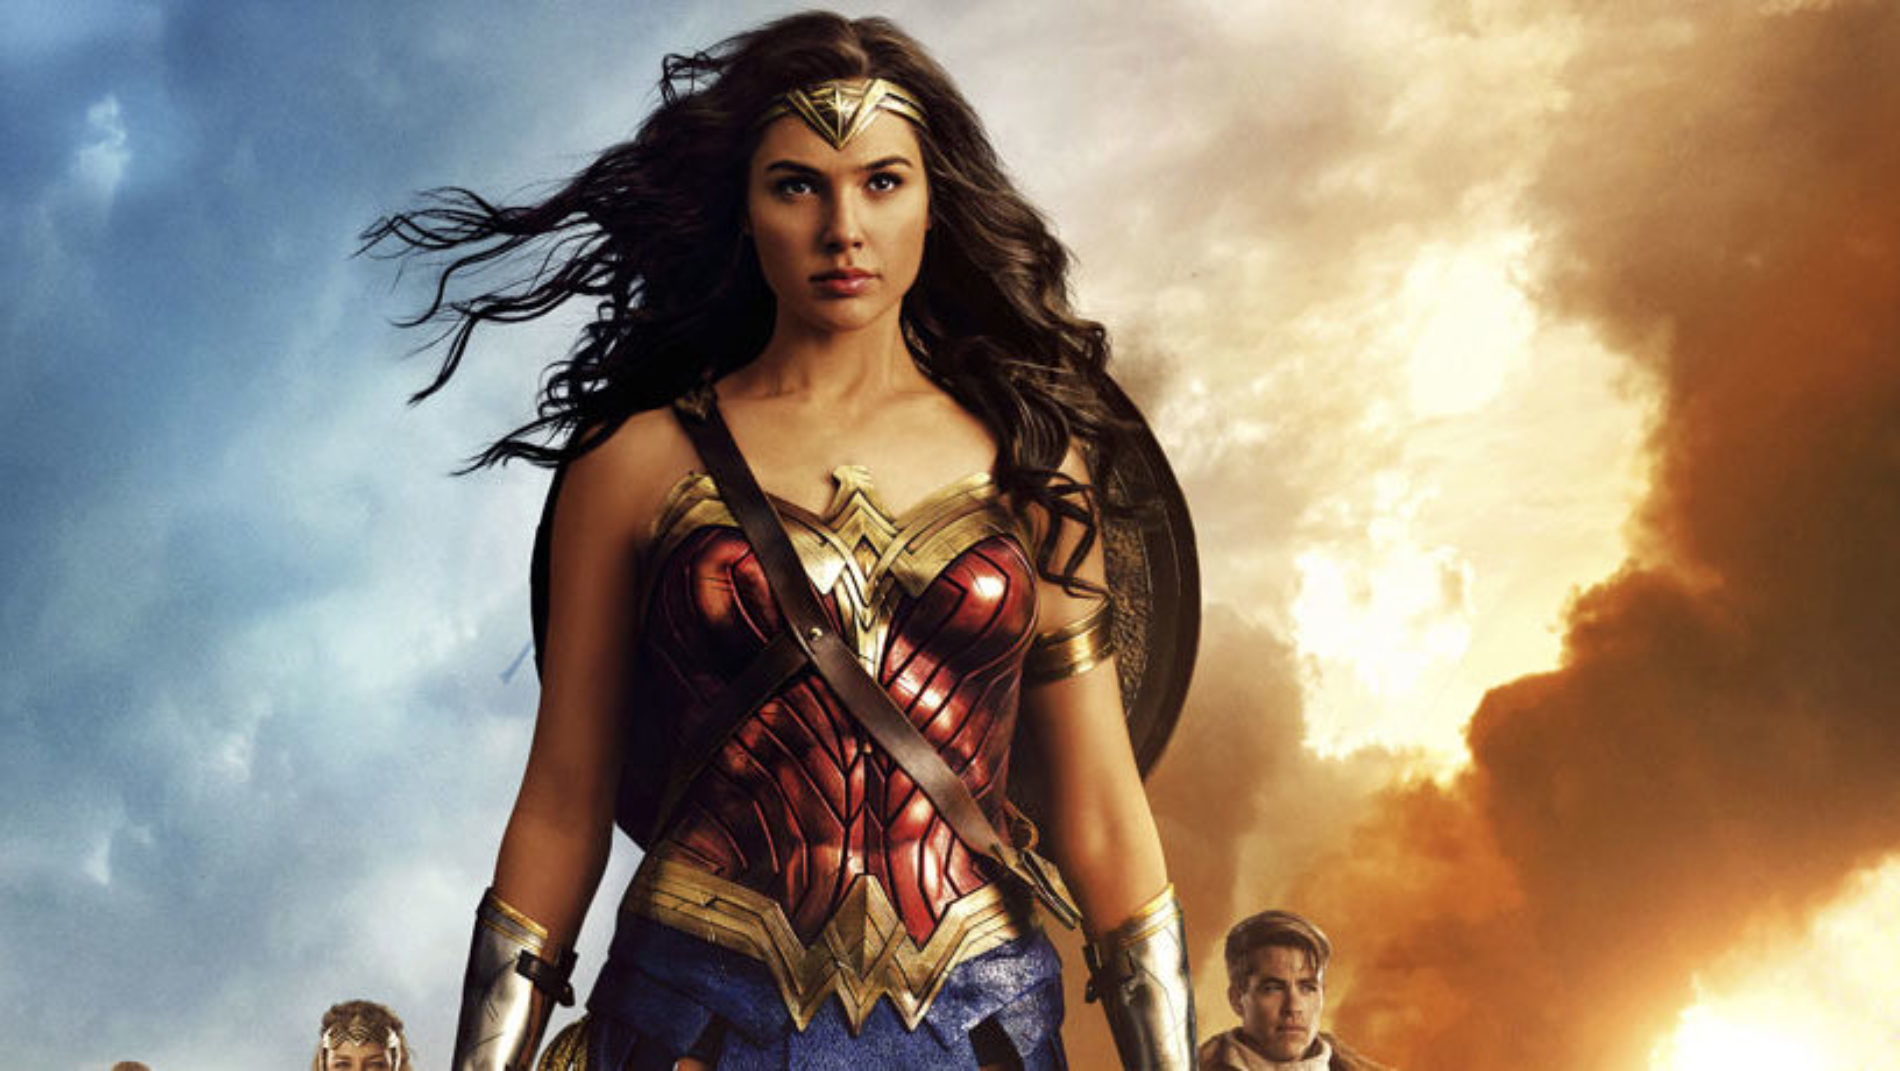 Fans are calling for Wonder Woman’s true sexuality to be revealed in the upcoming sequel